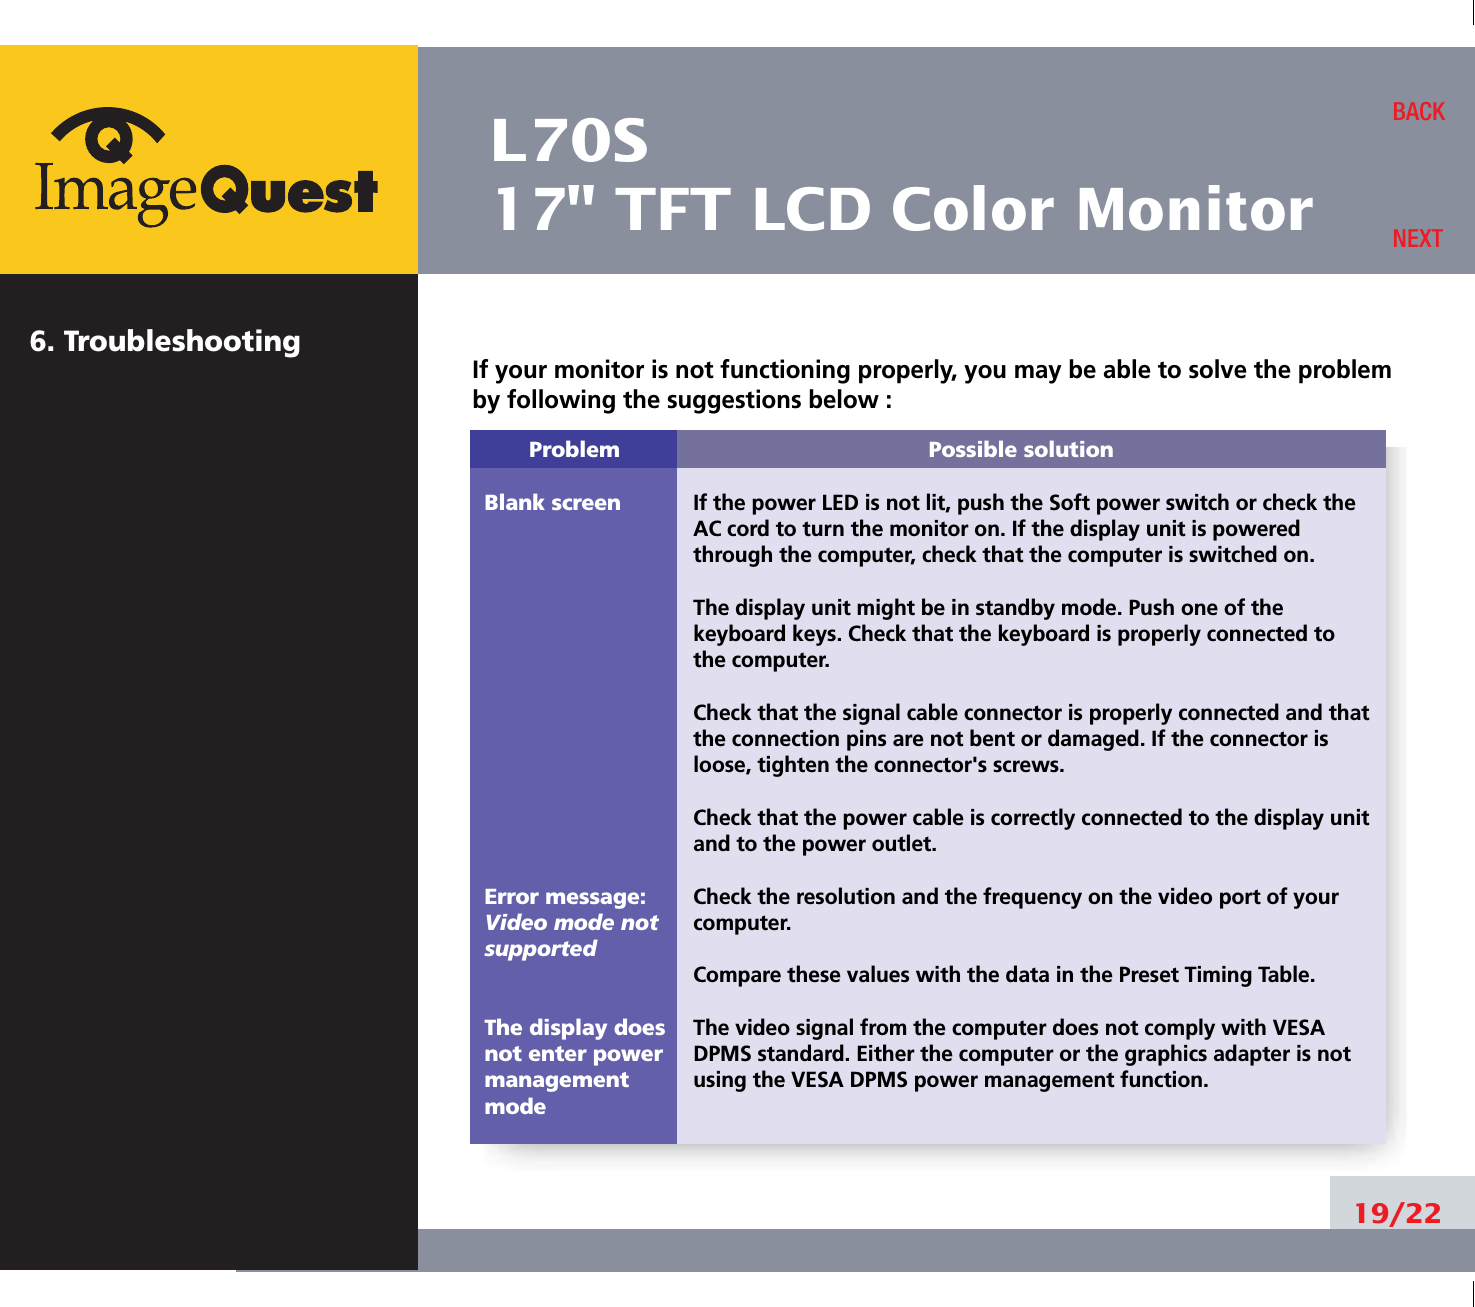 L70S17&quot; TFT LCD Color Monitor6. Troubleshooting19/22BACKNEXTProblemBlank screenError message:Video mode notsupportedThe display does not enter power managementmodePossible solutionIf the power LED is not lit, push the Soft power switch or check theAC cord to turn the monitor on. If the display unit is poweredthrough the computer, check that the computer is switched on.The display unit might be in standby mode. Push one of thekeyboard keys. Check that the keyboard is properly connected tothe computer.Check that the signal cable connector is properly connected and thatthe connection pins are not bent or damaged. If the connector isloose, tighten the connector&apos;s screws.Check that the power cable is correctly connected to the display unitand to the power outlet. Check the resolution and the frequency on the video port of yourcomputer.Compare these values with the data in the Preset Timing Table.The video signal from the computer does not comply with VESADPMS standard. Either the computer or the graphics adapter is notusing the VESA DPMS power management function.If your monitor is not functioning properly, you may be able to solve the problemby following the suggestions below :